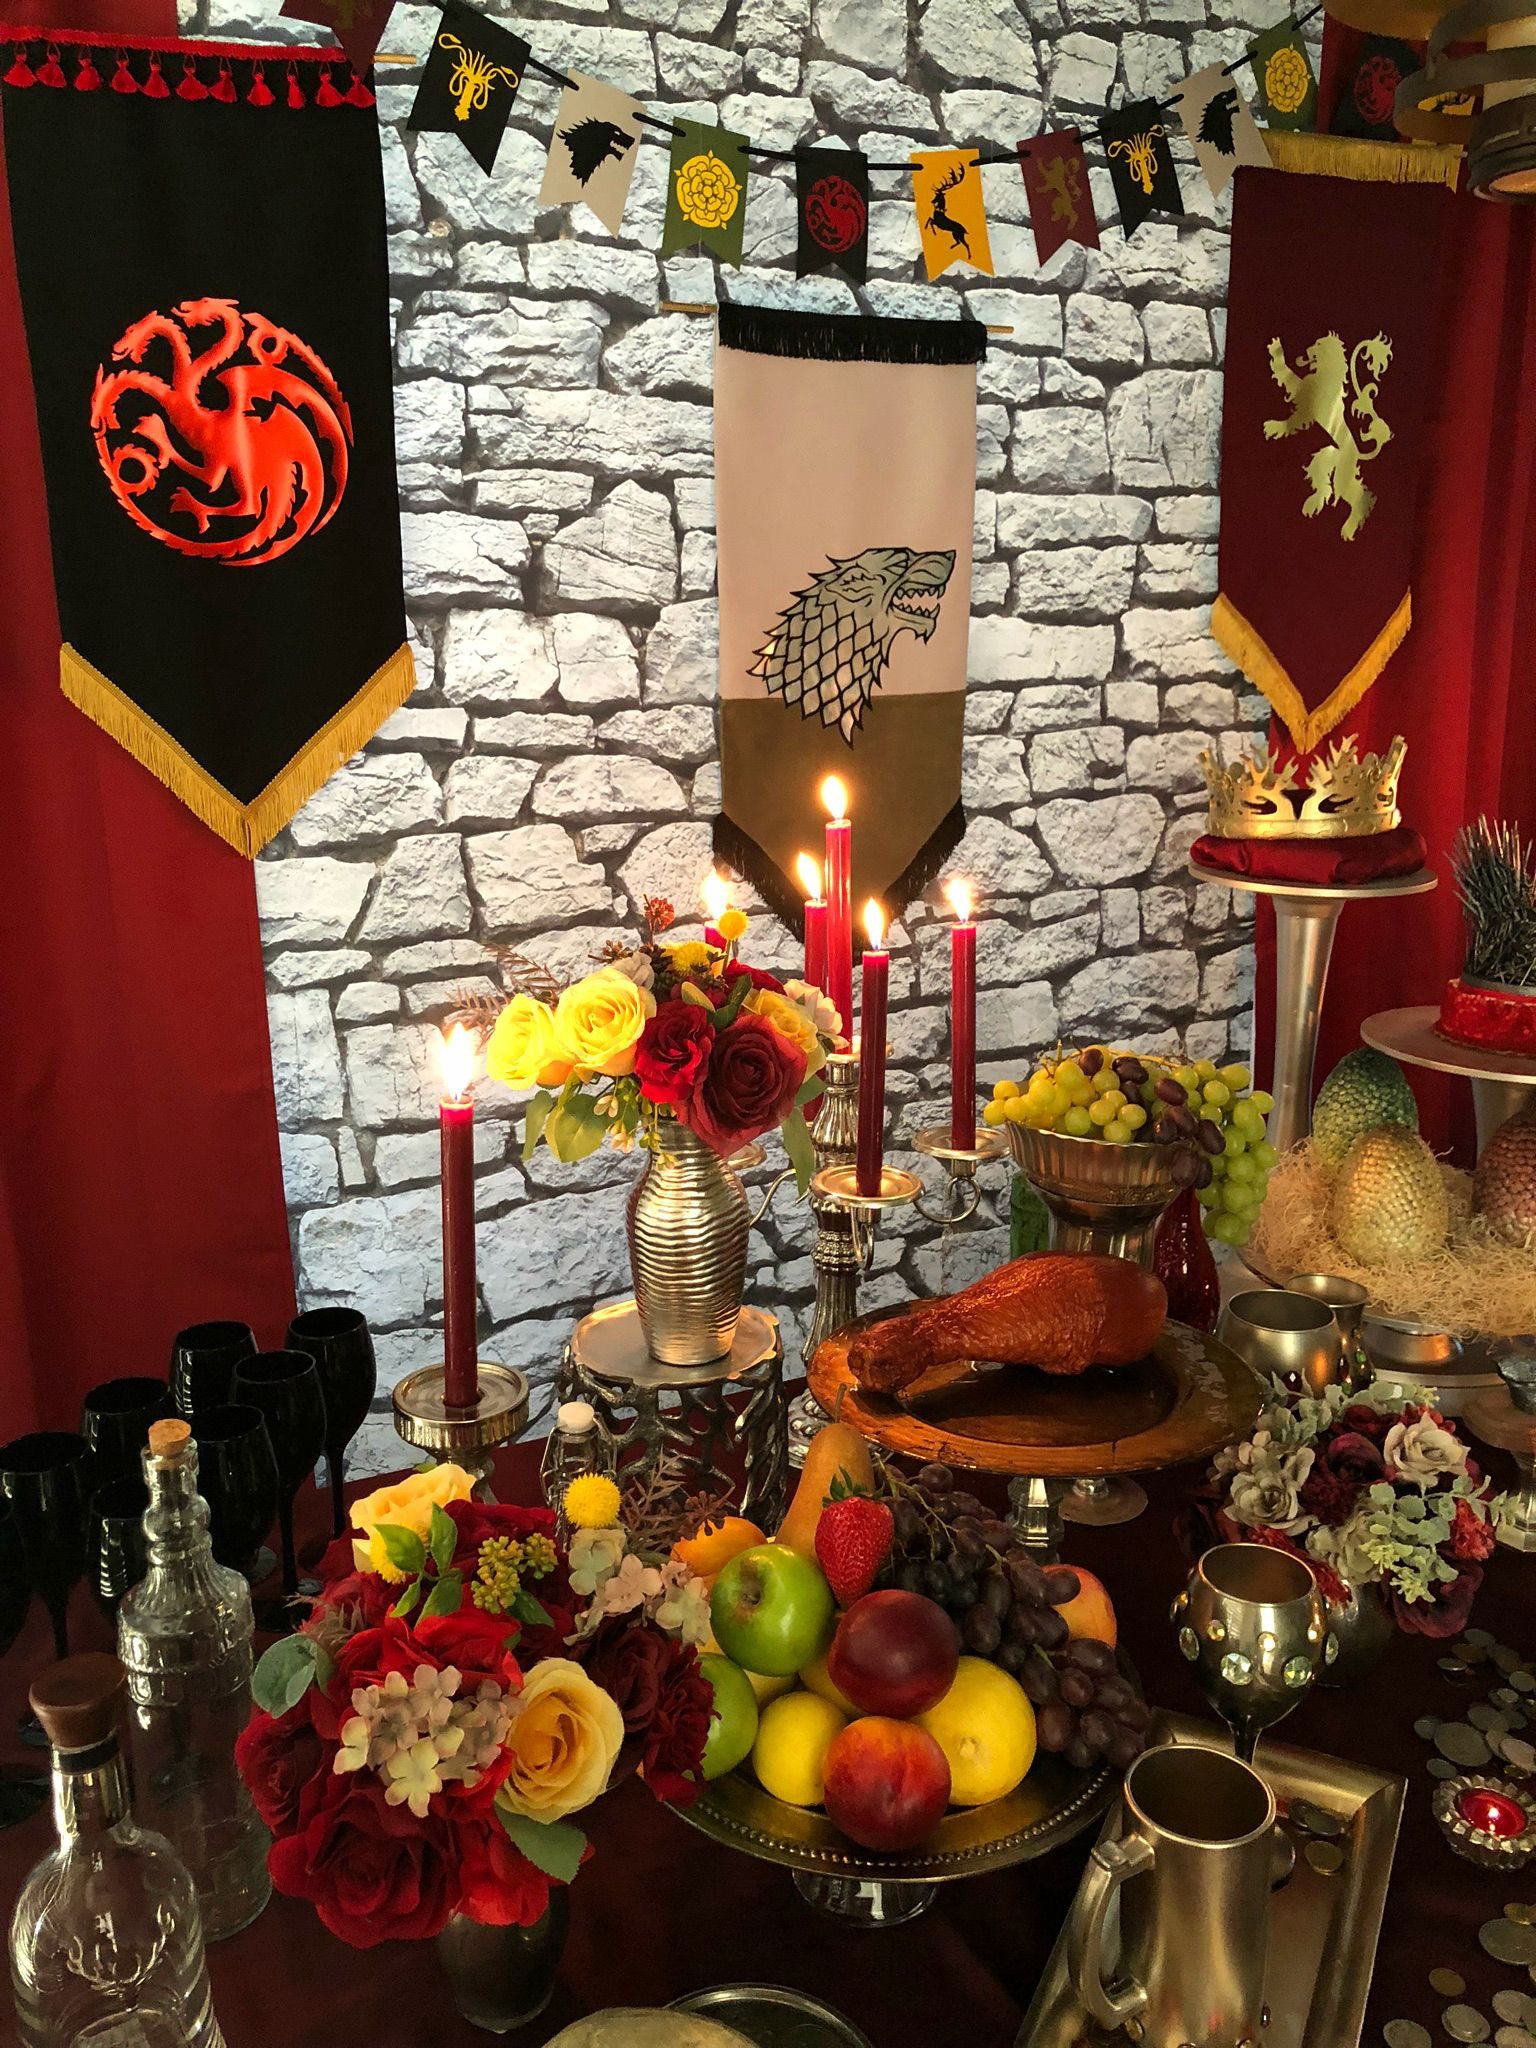 Game Of Thrones Dinner Party Ideas
 DIY Game of Thrones Decorations